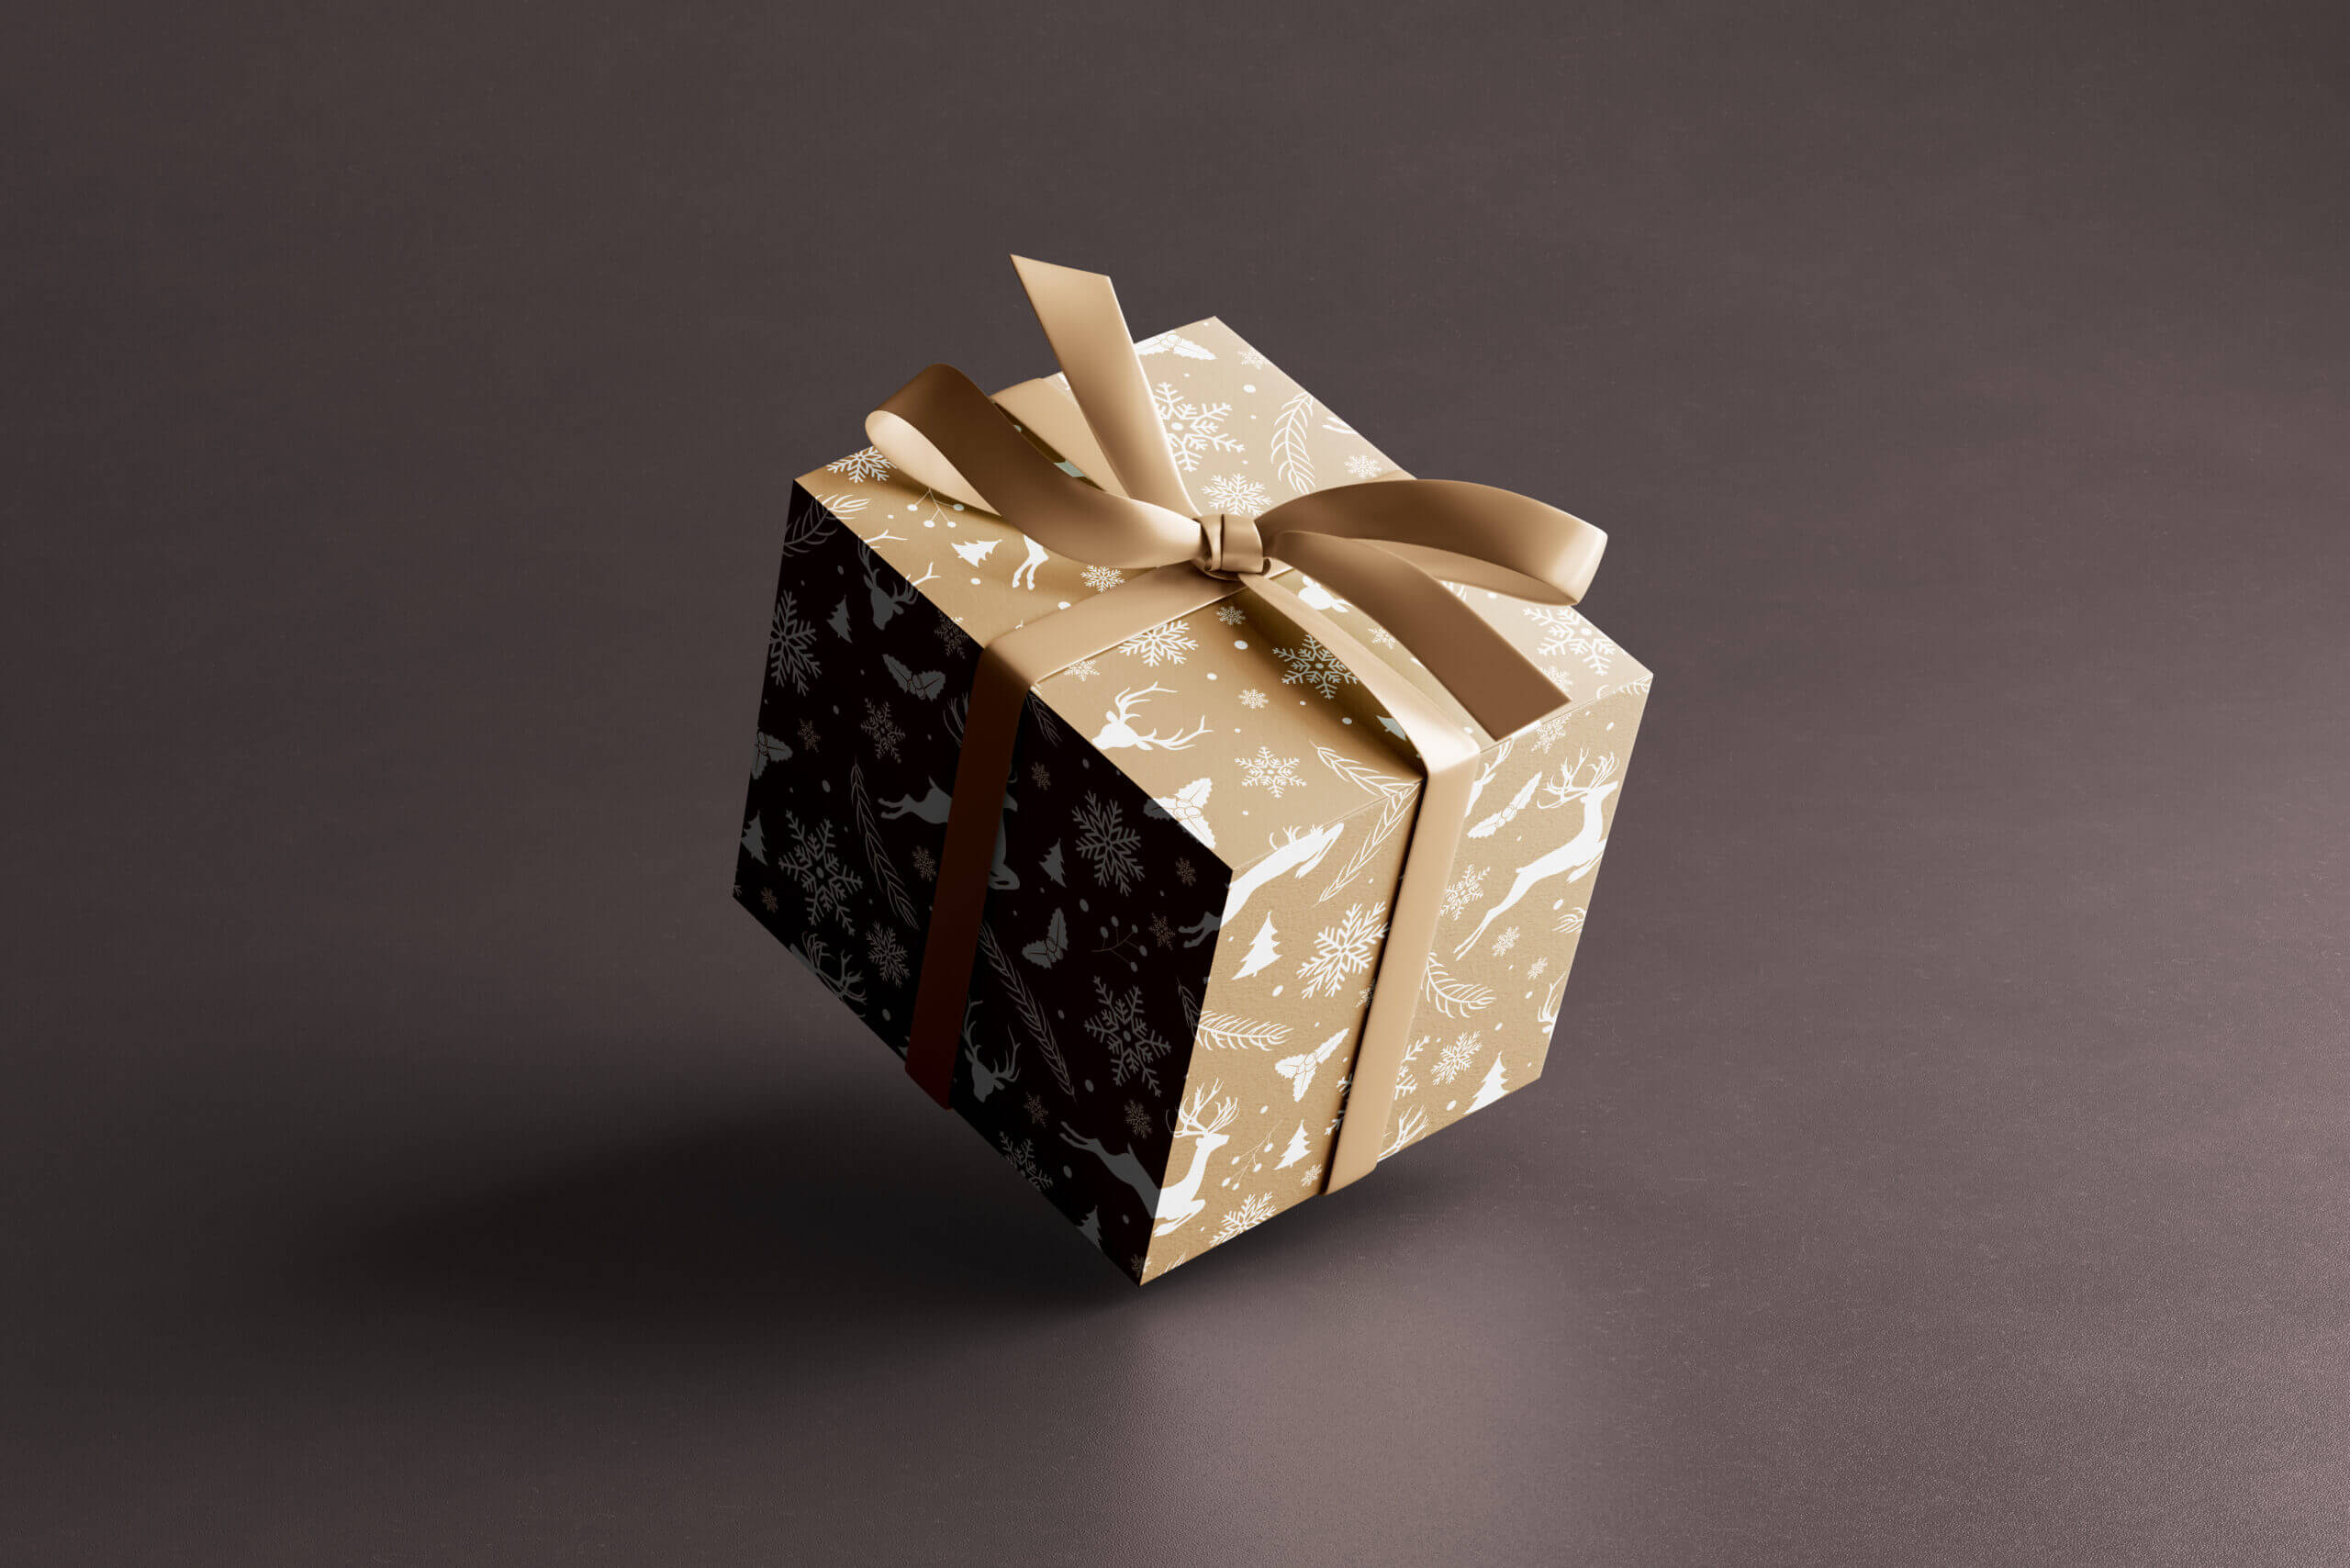 5 Free Wrapped With Ribbon Square Gift Box Mockup PSD Files4